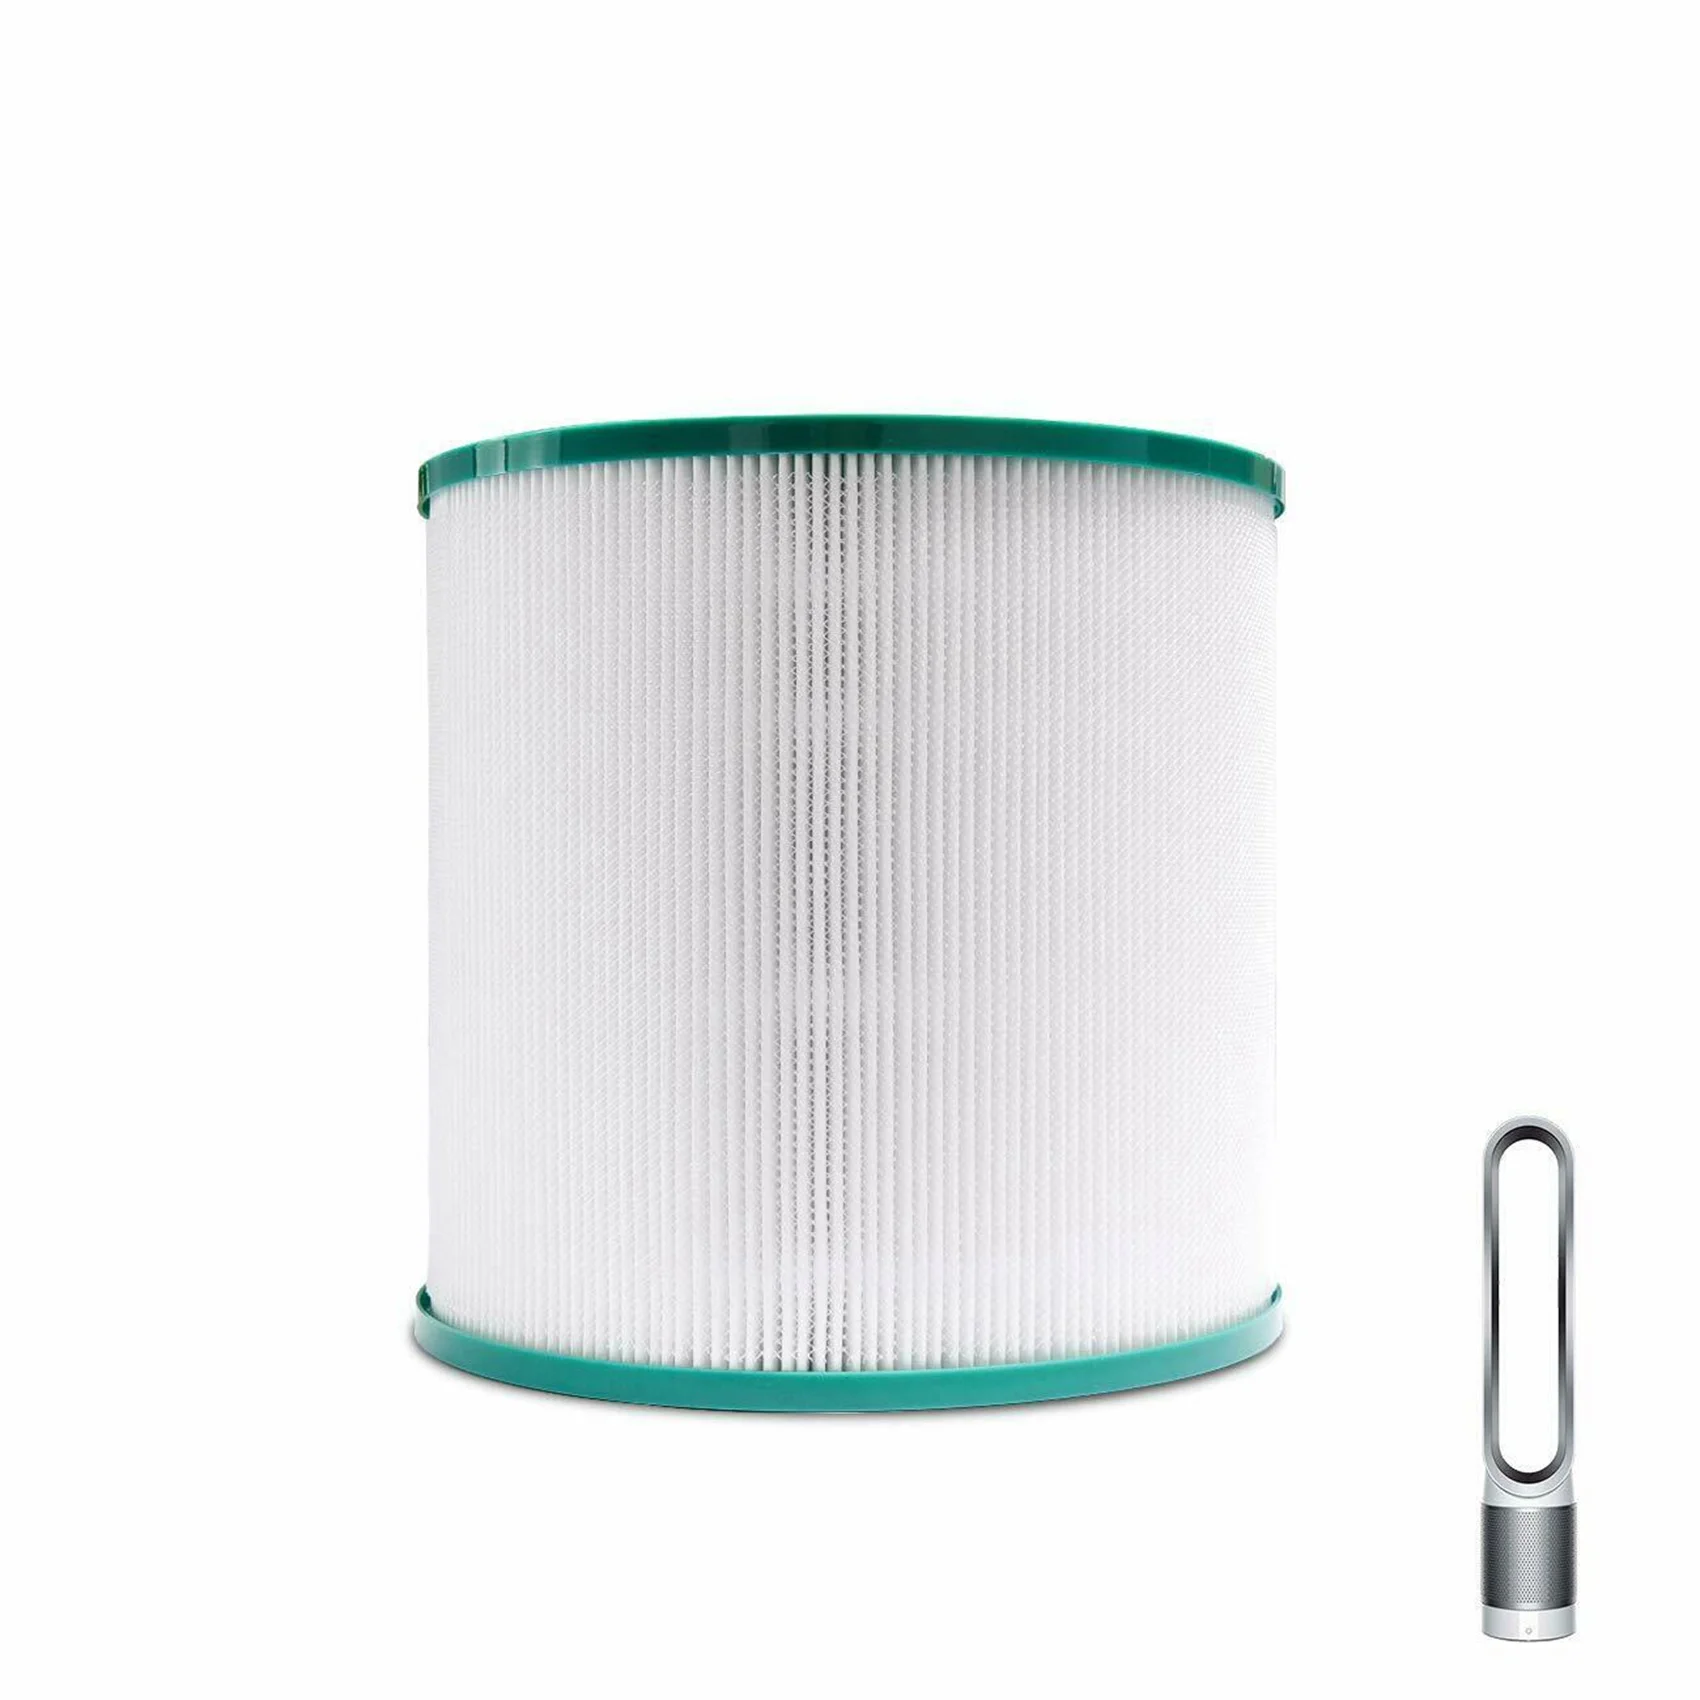 Tower Air Purifier Hepa Filter for Dyson Pure Cool Link with Washable Big Filter for Dyson V11 Sv14 Cyclone Animal images - 6